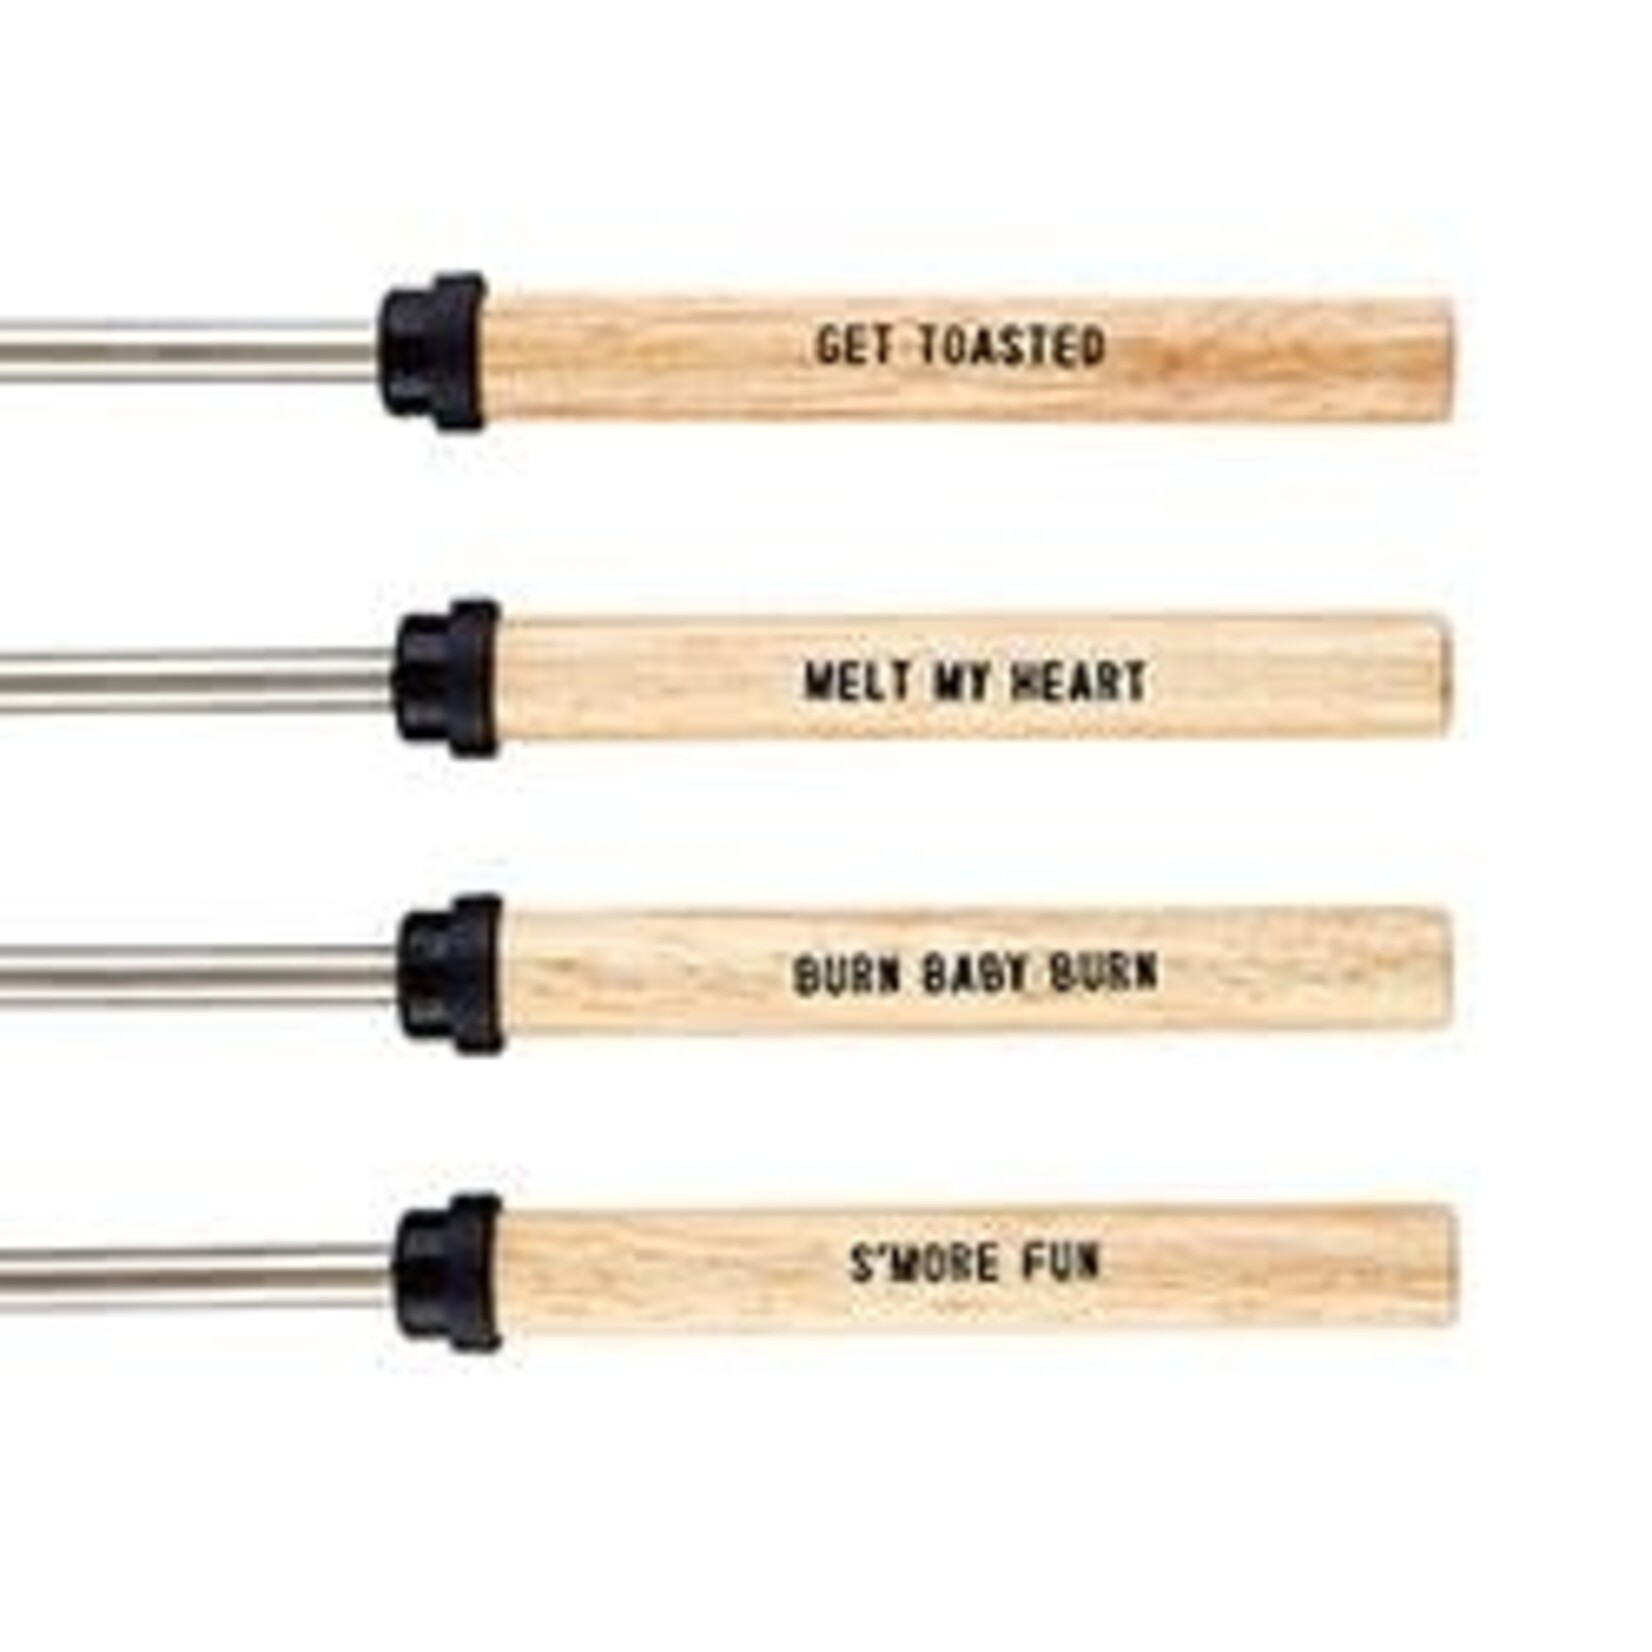 Outside The Box 13" Set Of 4 S'Mores Wood & Stainless Steel Roasting Sticks